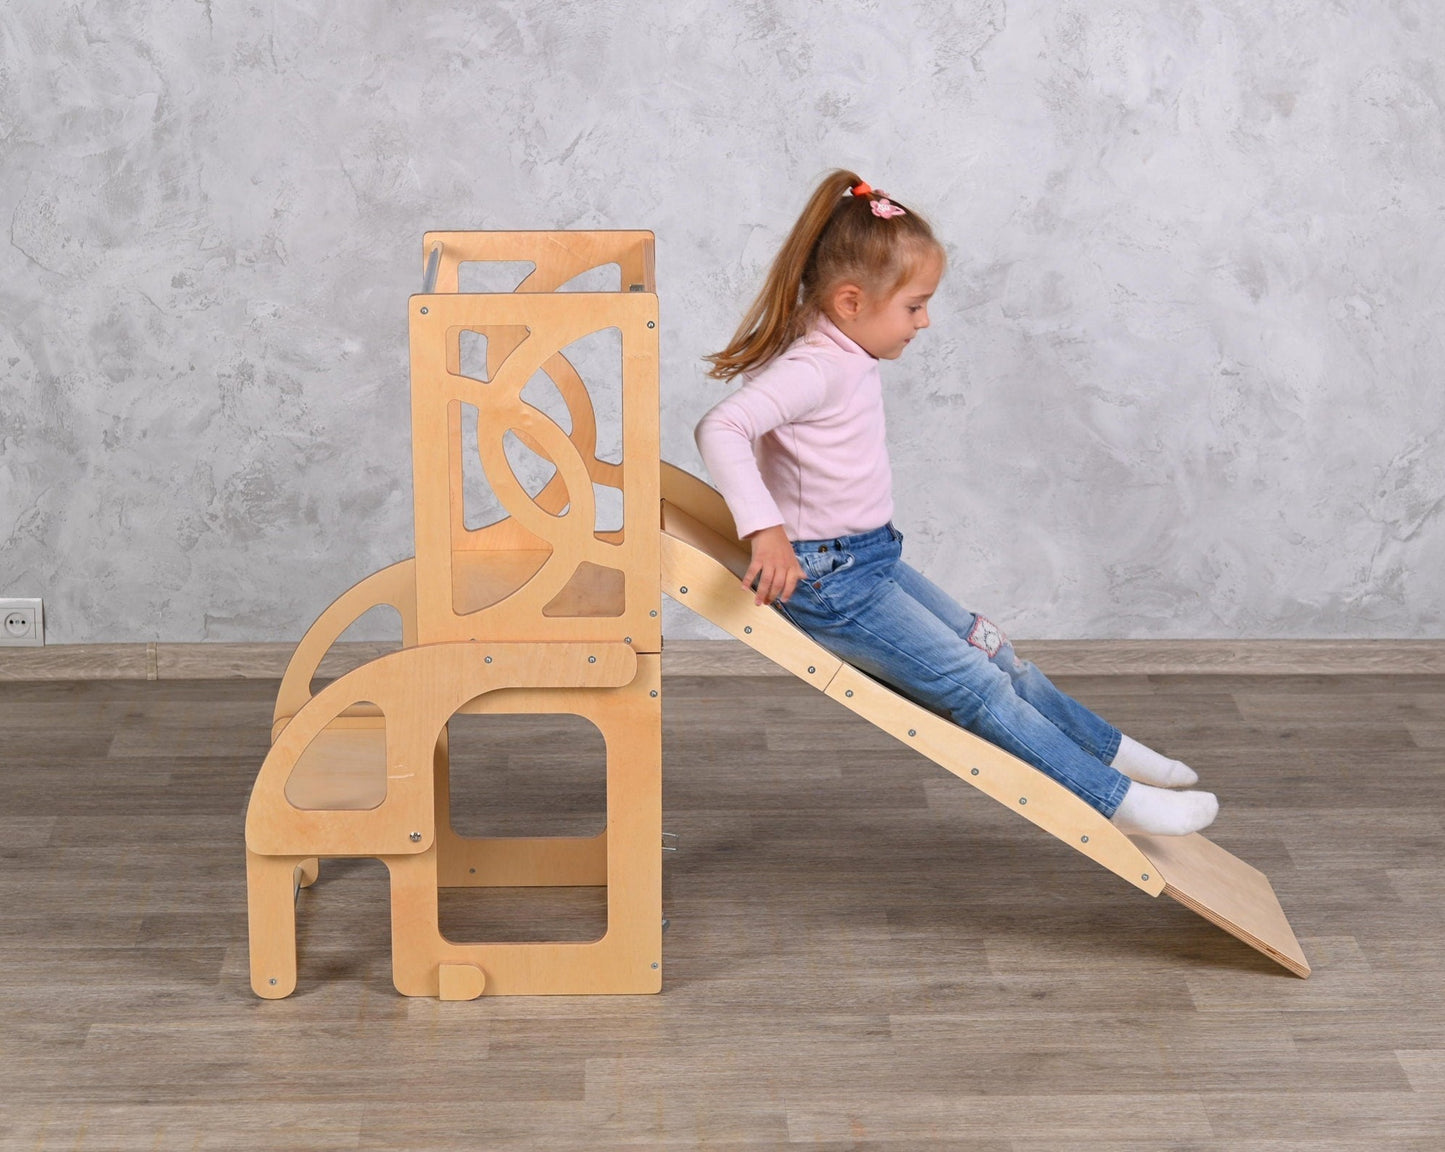 Convertible learning tower with seatback and slide, Twins learning toddler tower - Climbambino